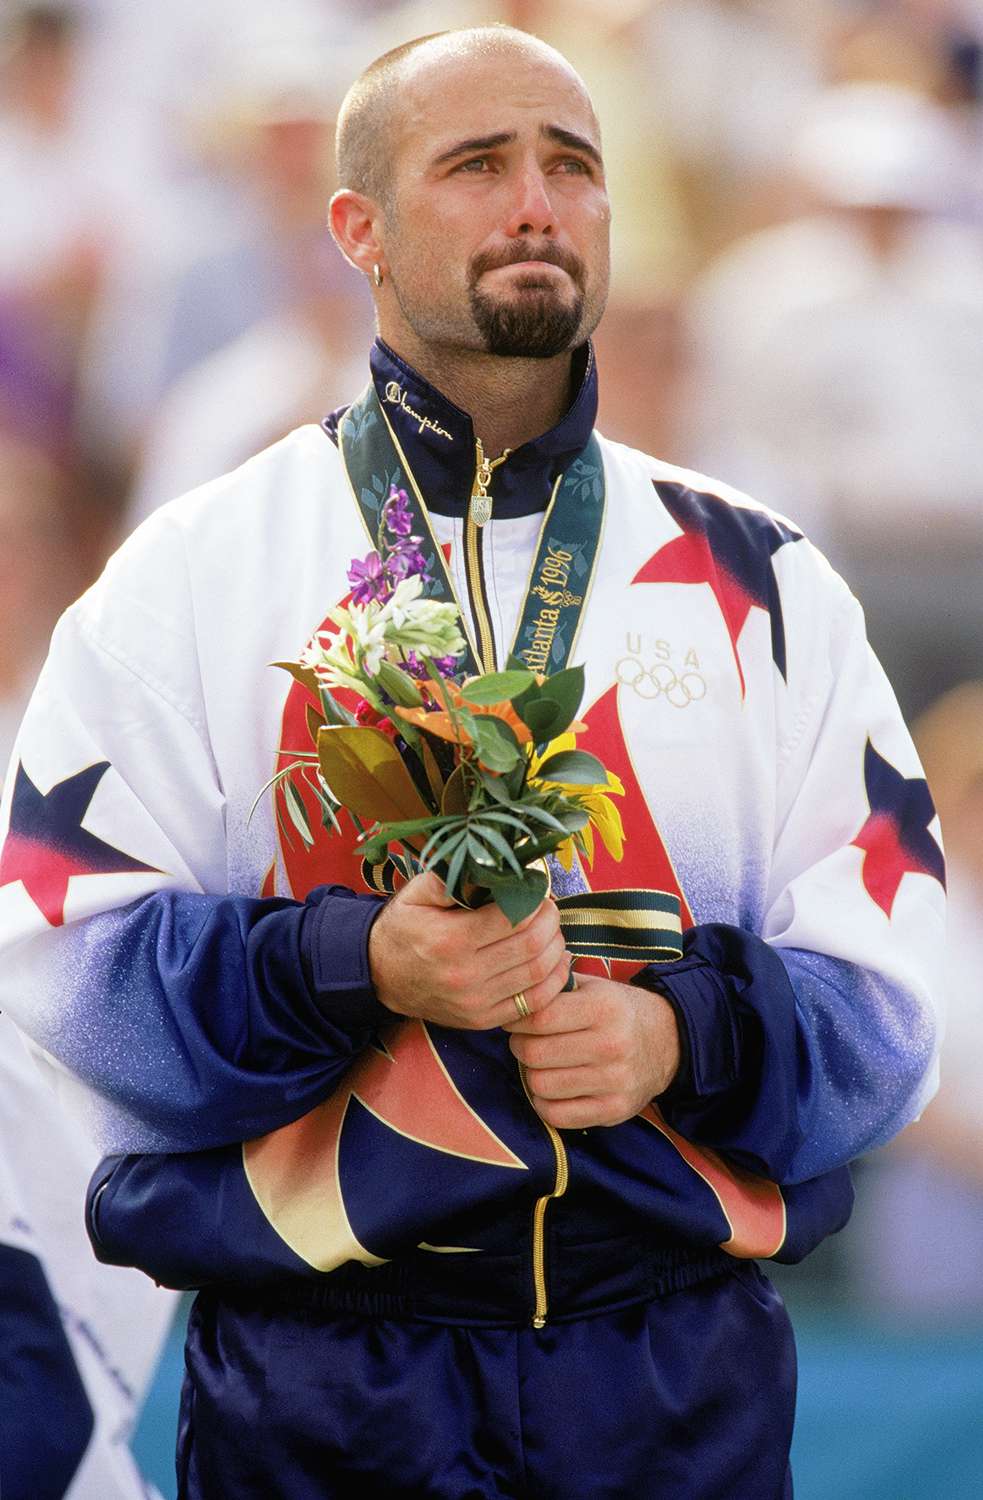 Andre Agassi is full with emotion as he stands as the men's tennis singles gold medal winner during the XXVI Olympic Games at the Stone Mountain Tennis Center on August 3, 1996 in Atlanta, Georgia.